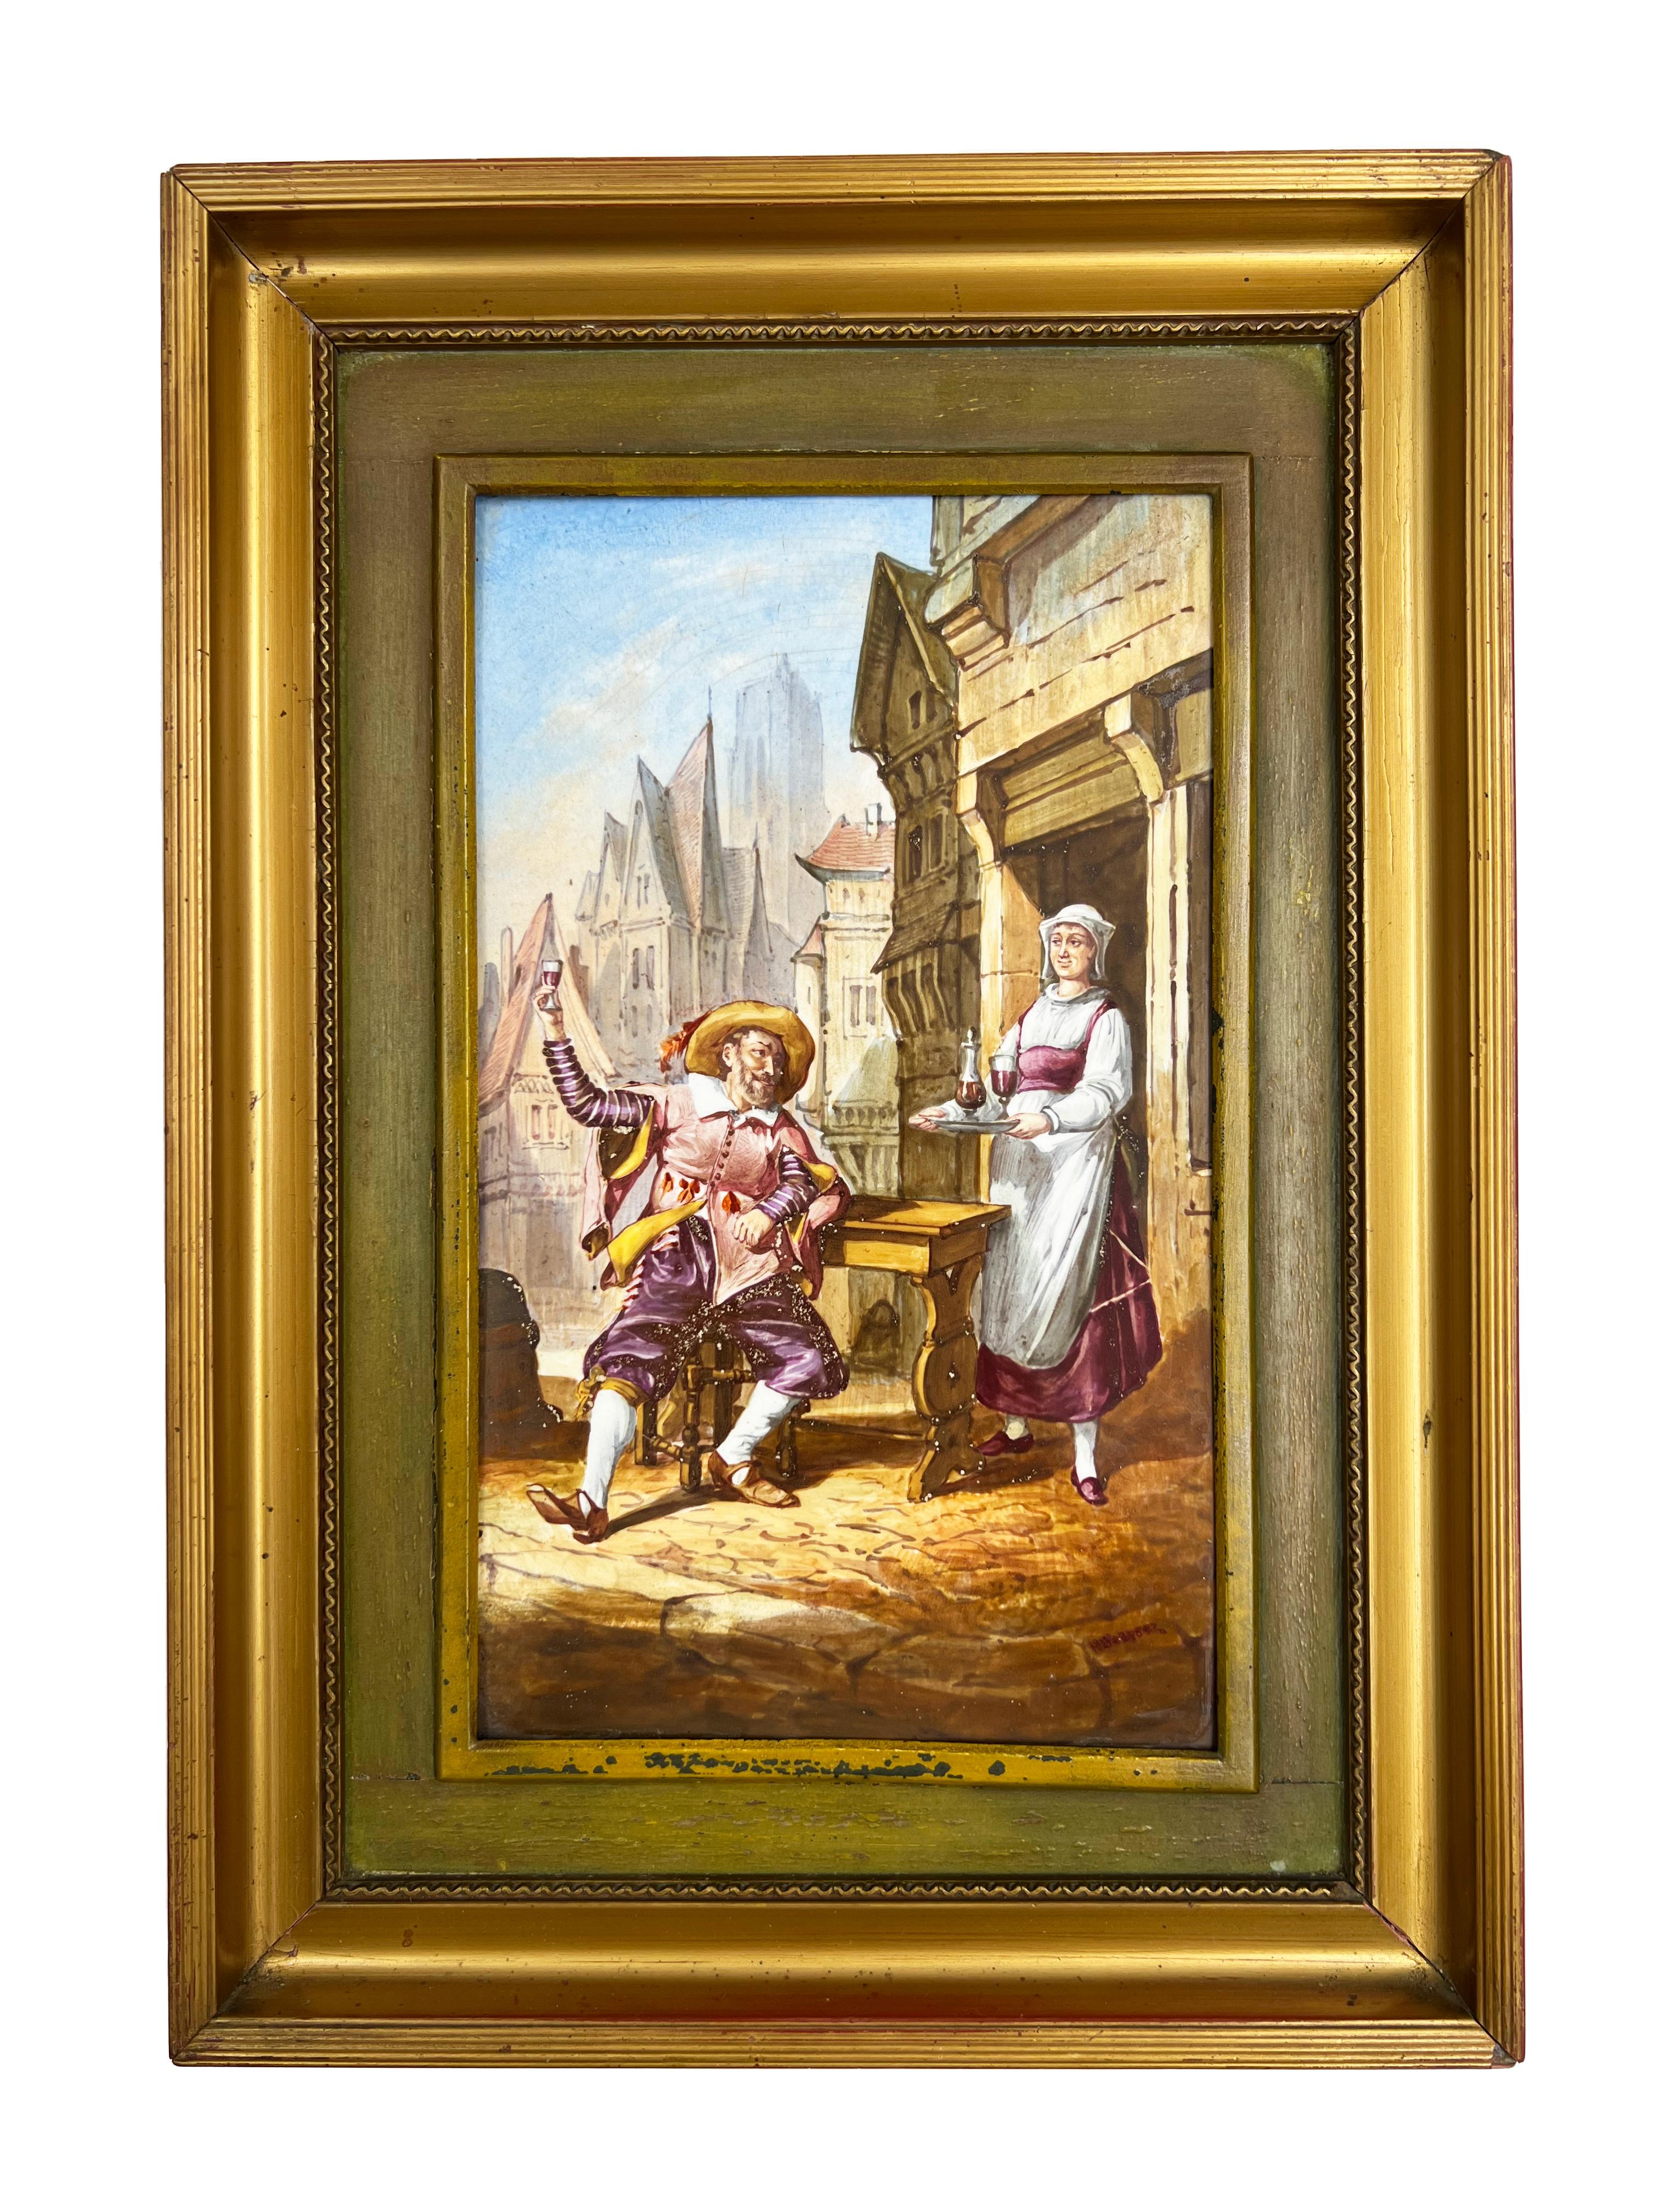  A pair of Sevres style painted porcelain plaques, depicting male and female in town scene, in elaborate gilt frames, signed H. Desprez 20th century school.

Dimensions: Frame: H: 31.5cm, W: 22.5cm

Plaques: H: 22cm, W: 13.5cm